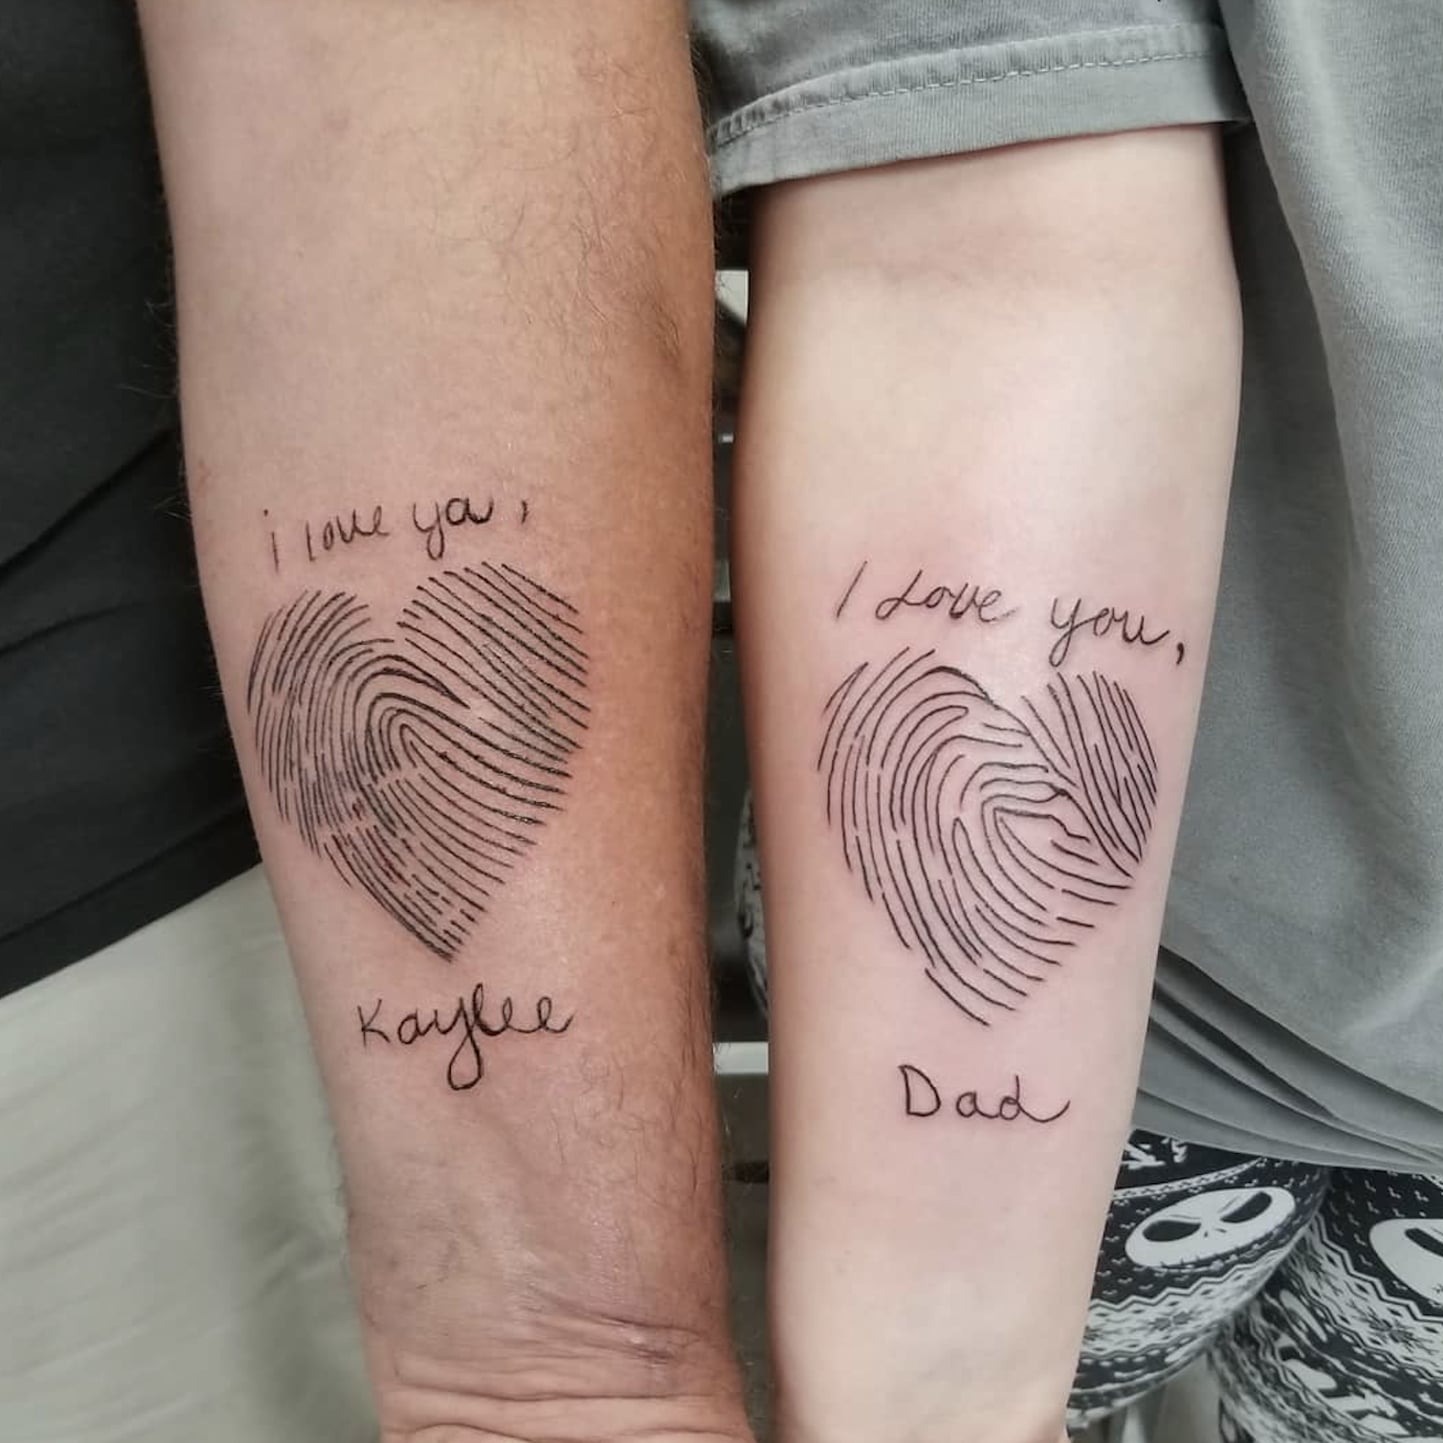 Father and daughter tattoo symbols